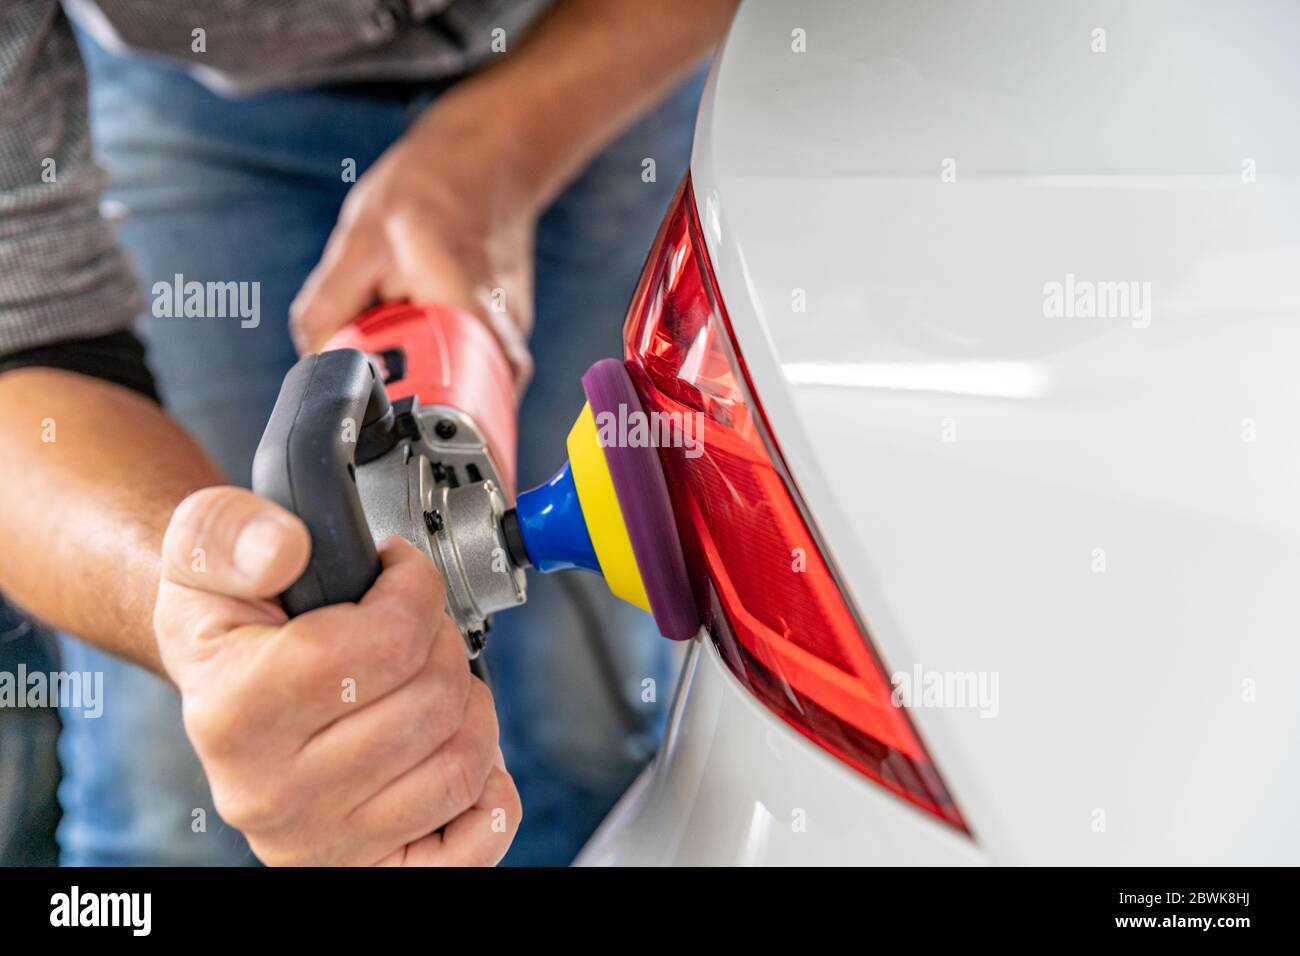 Car polishing: Is using a machine better than using your hands